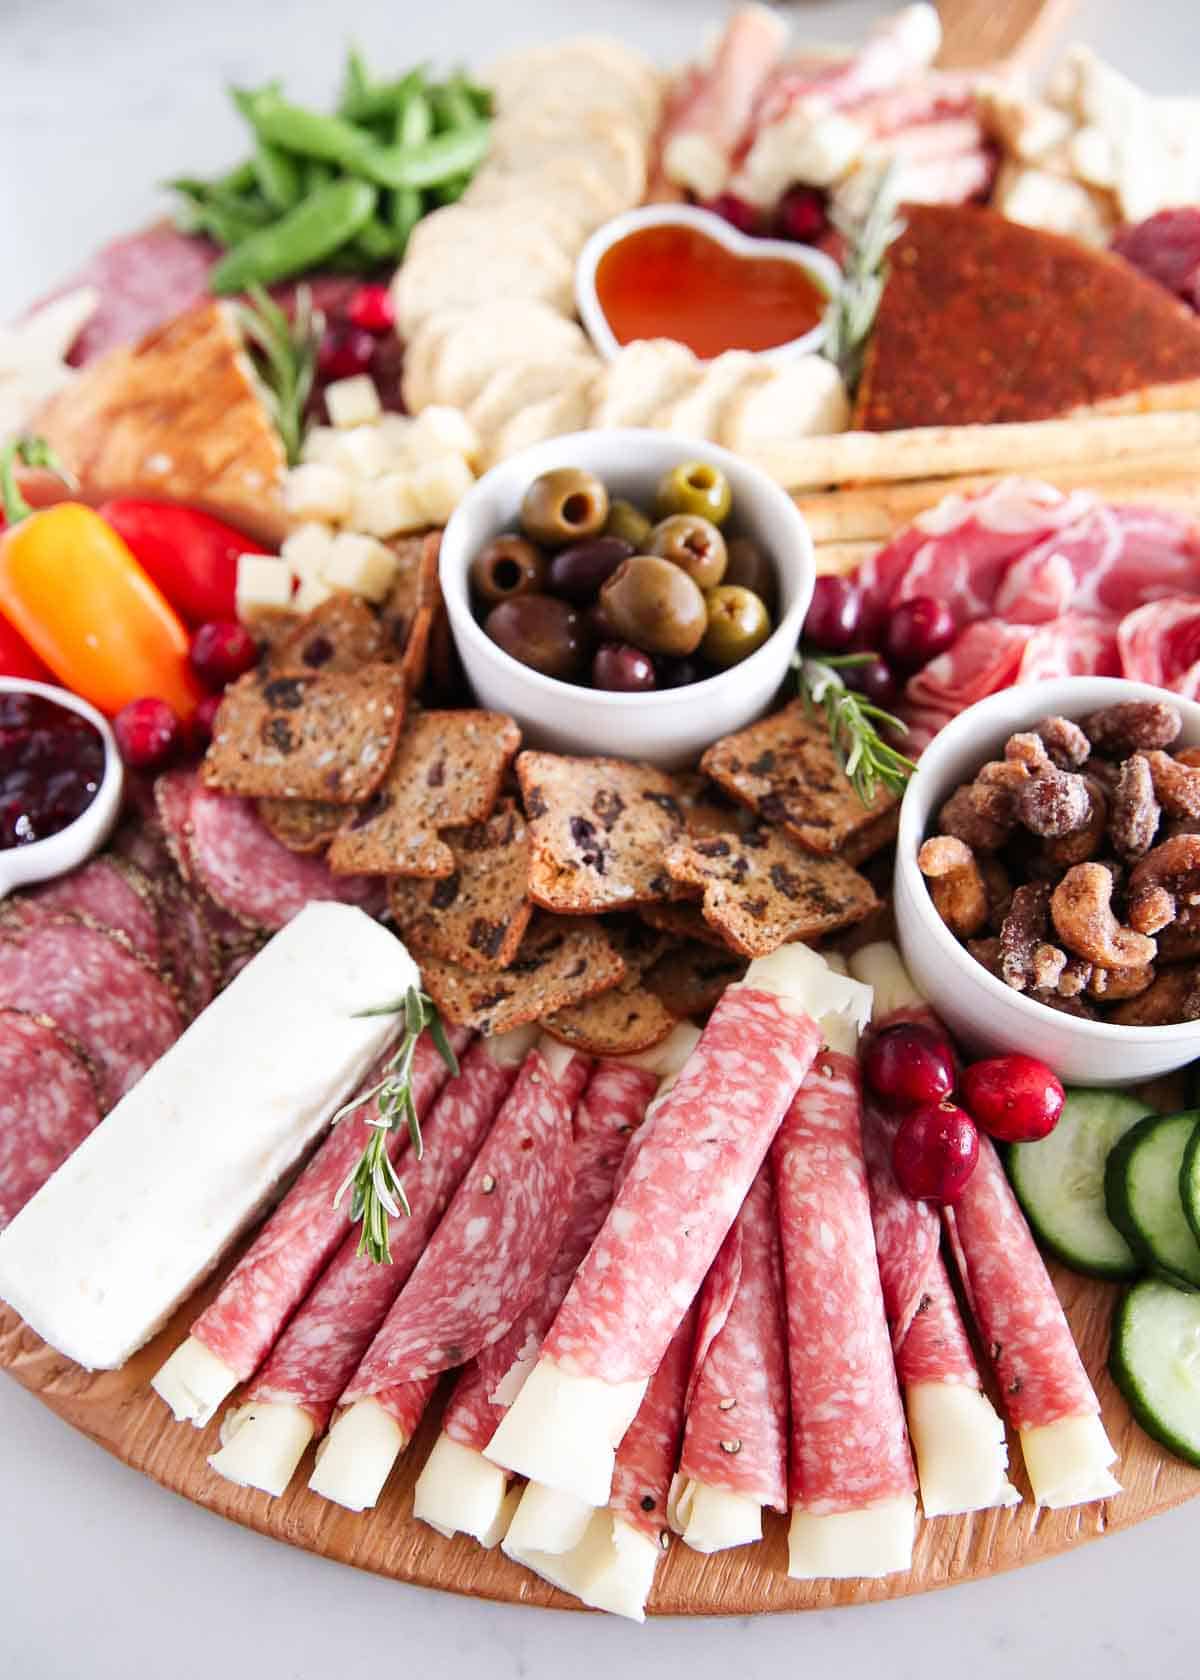 How to Make The Best Charcuterie Board - I Heart Naptime